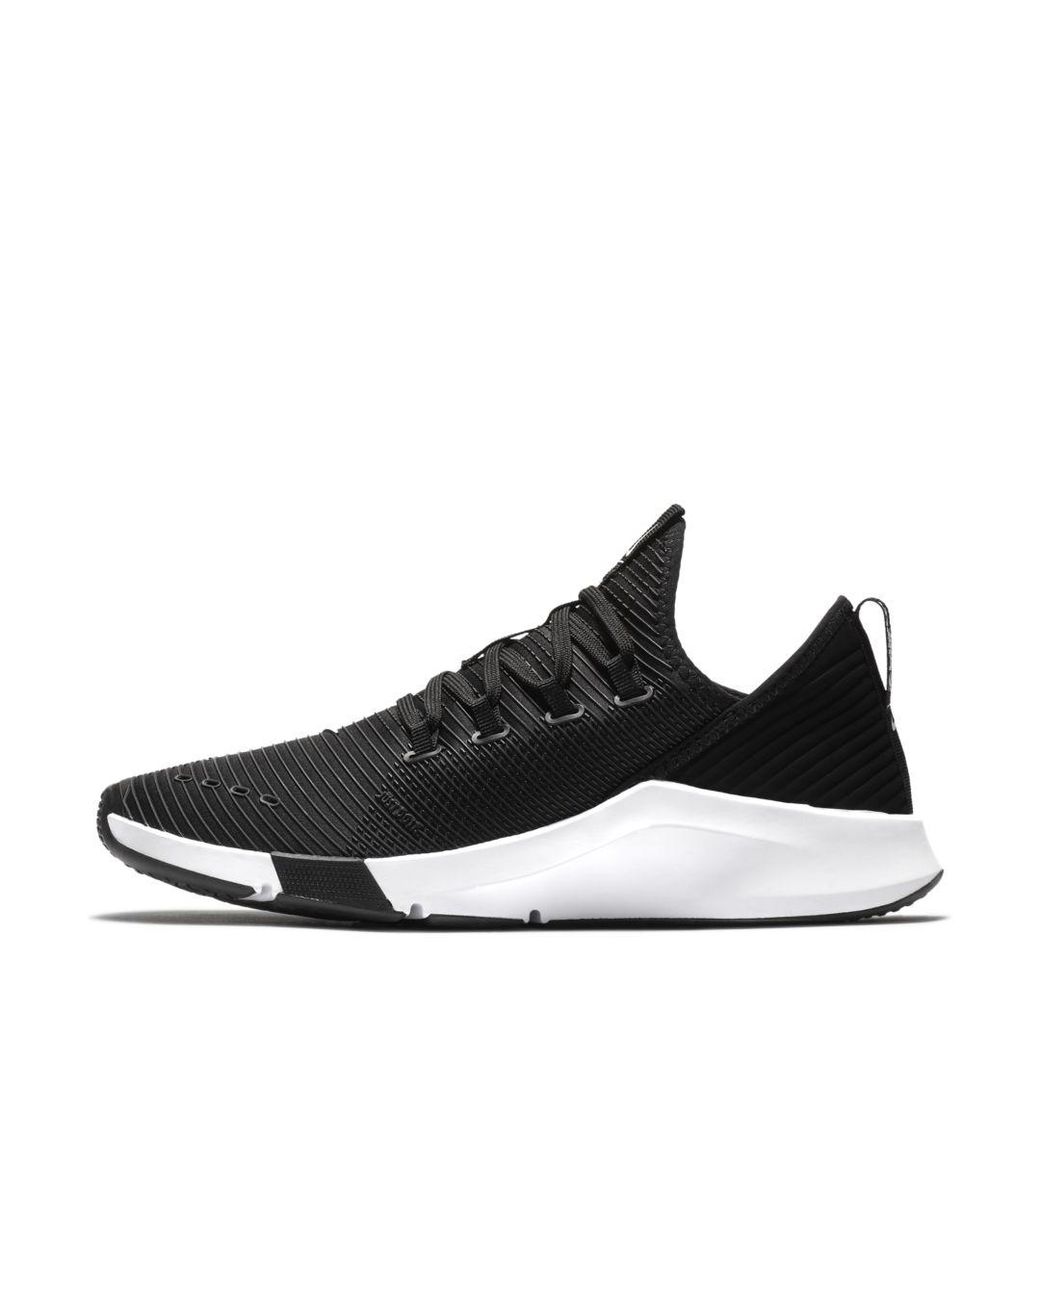 Beber agua Contracción ejemplo Nike Air Zoom Elevate Gym/training/boxing Shoe in Black | Lyst